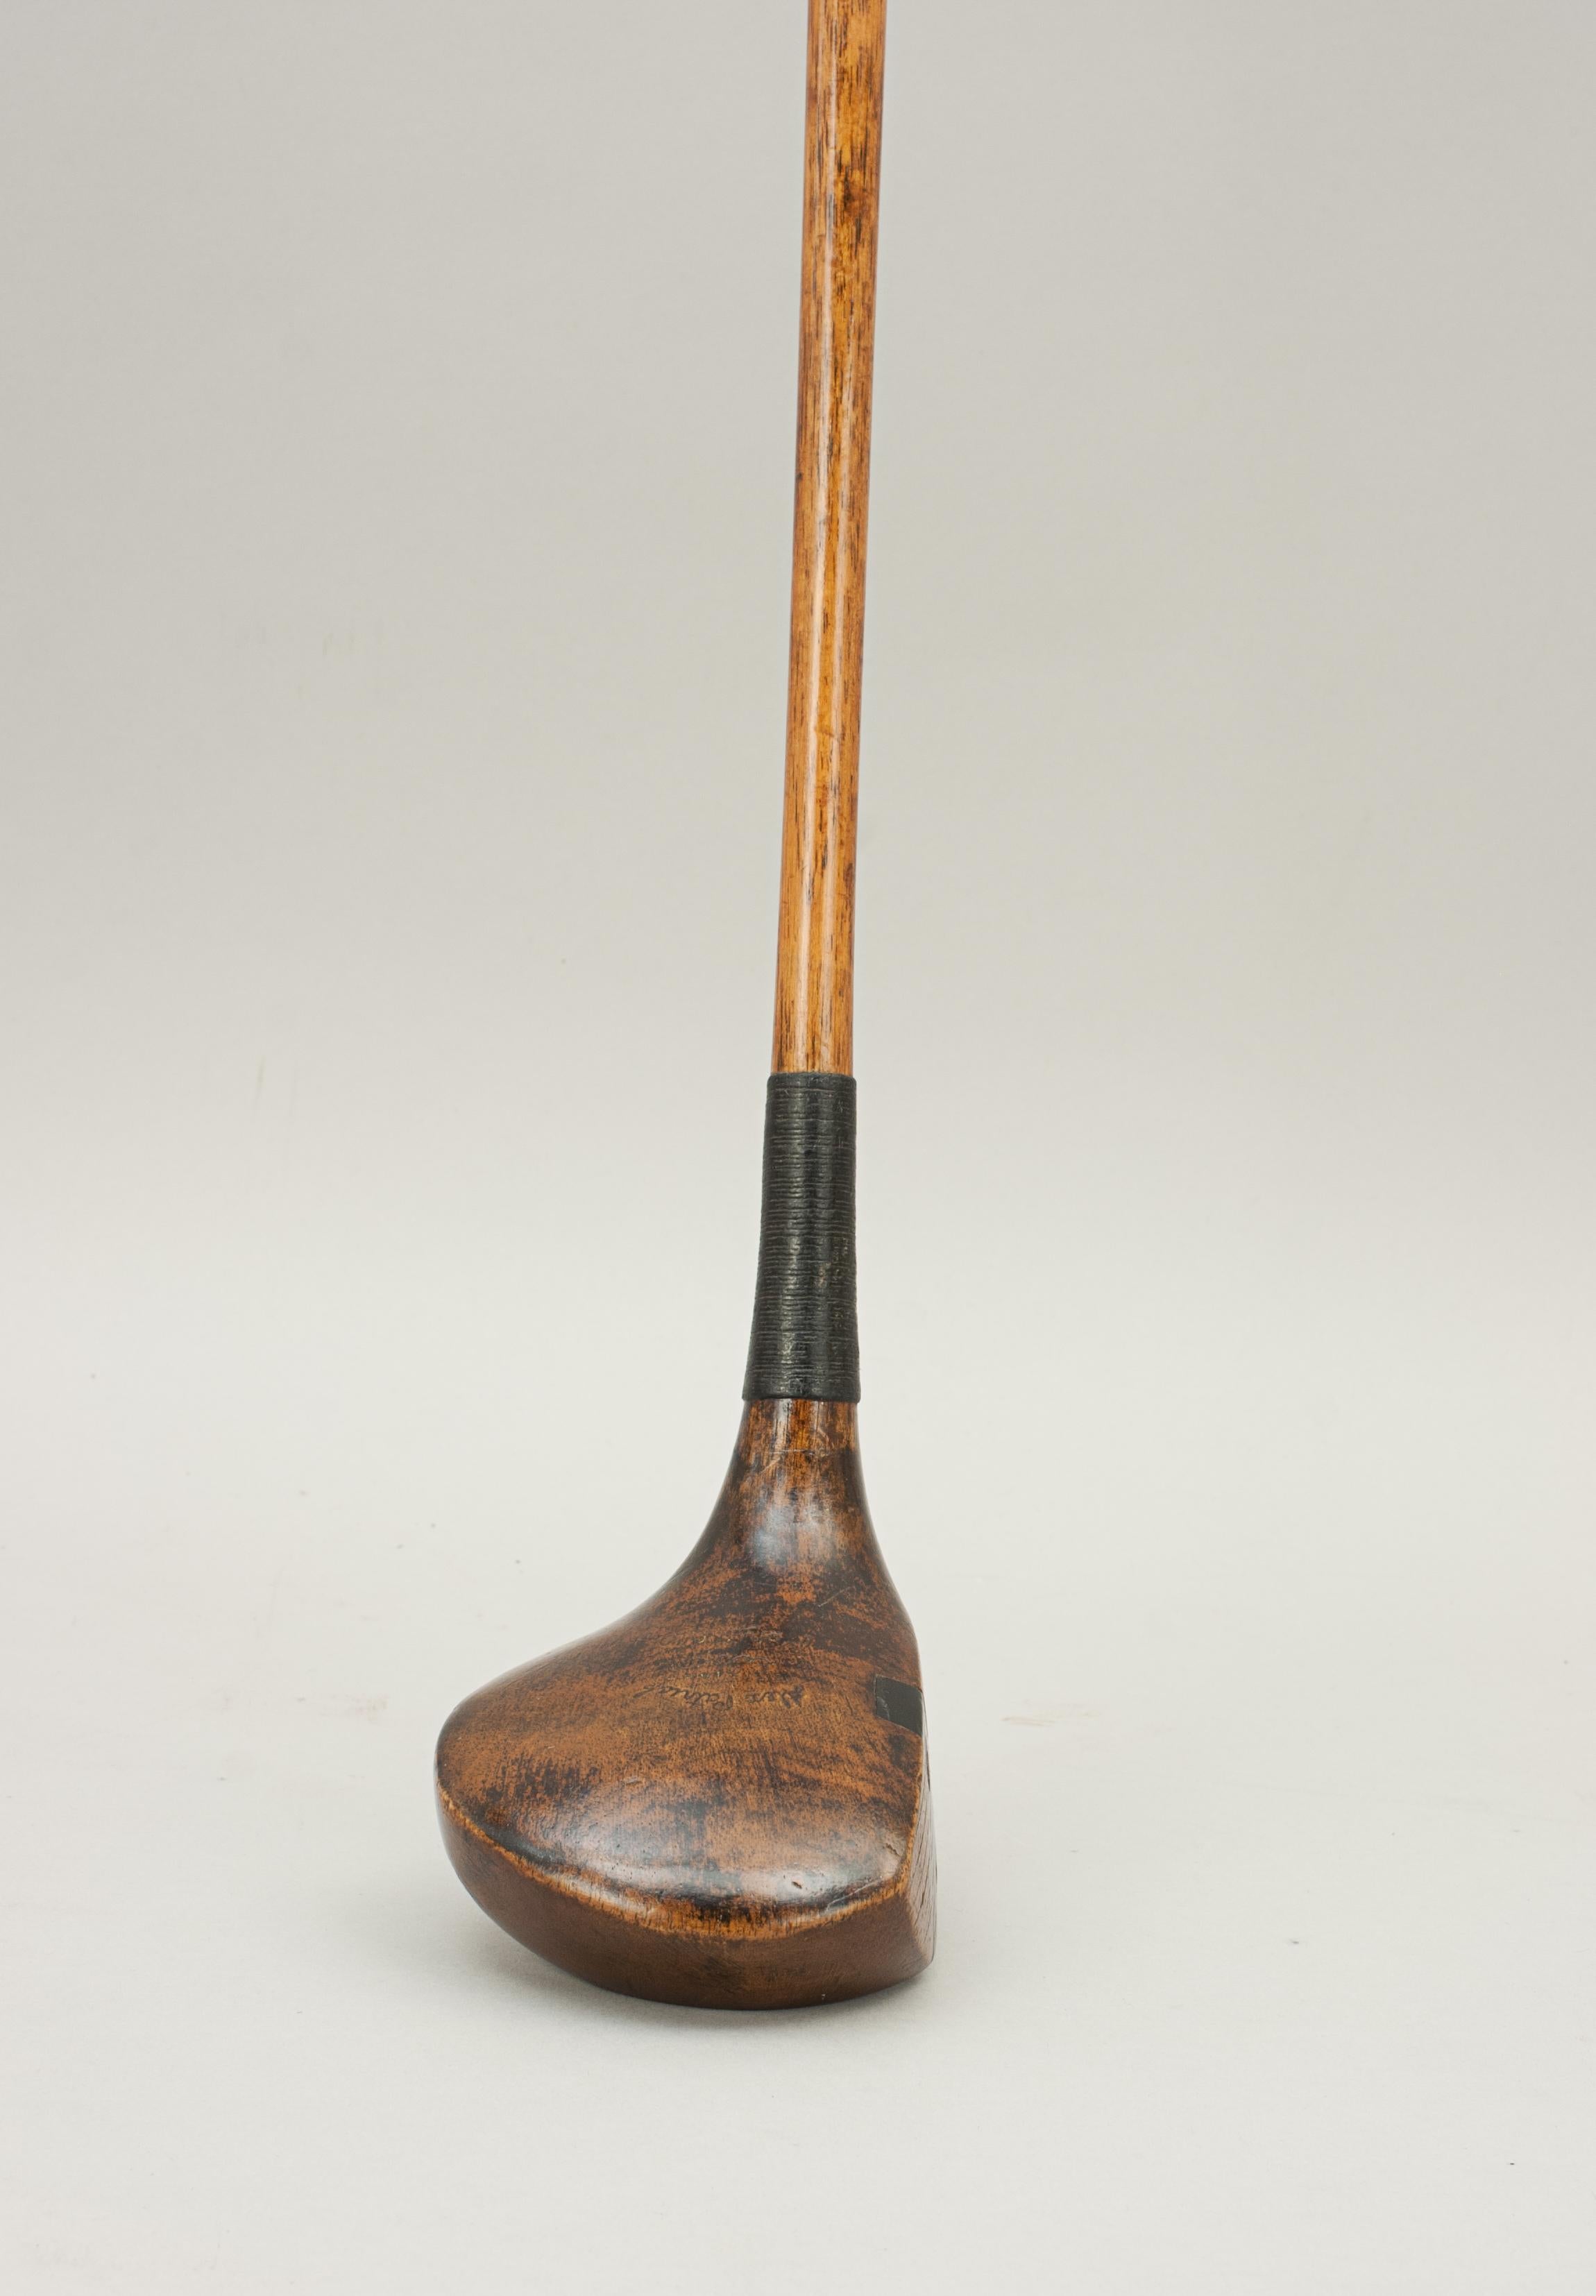 Vintage Hickory Shafted Brassie Golf Club by T. Simpson of Southport 4